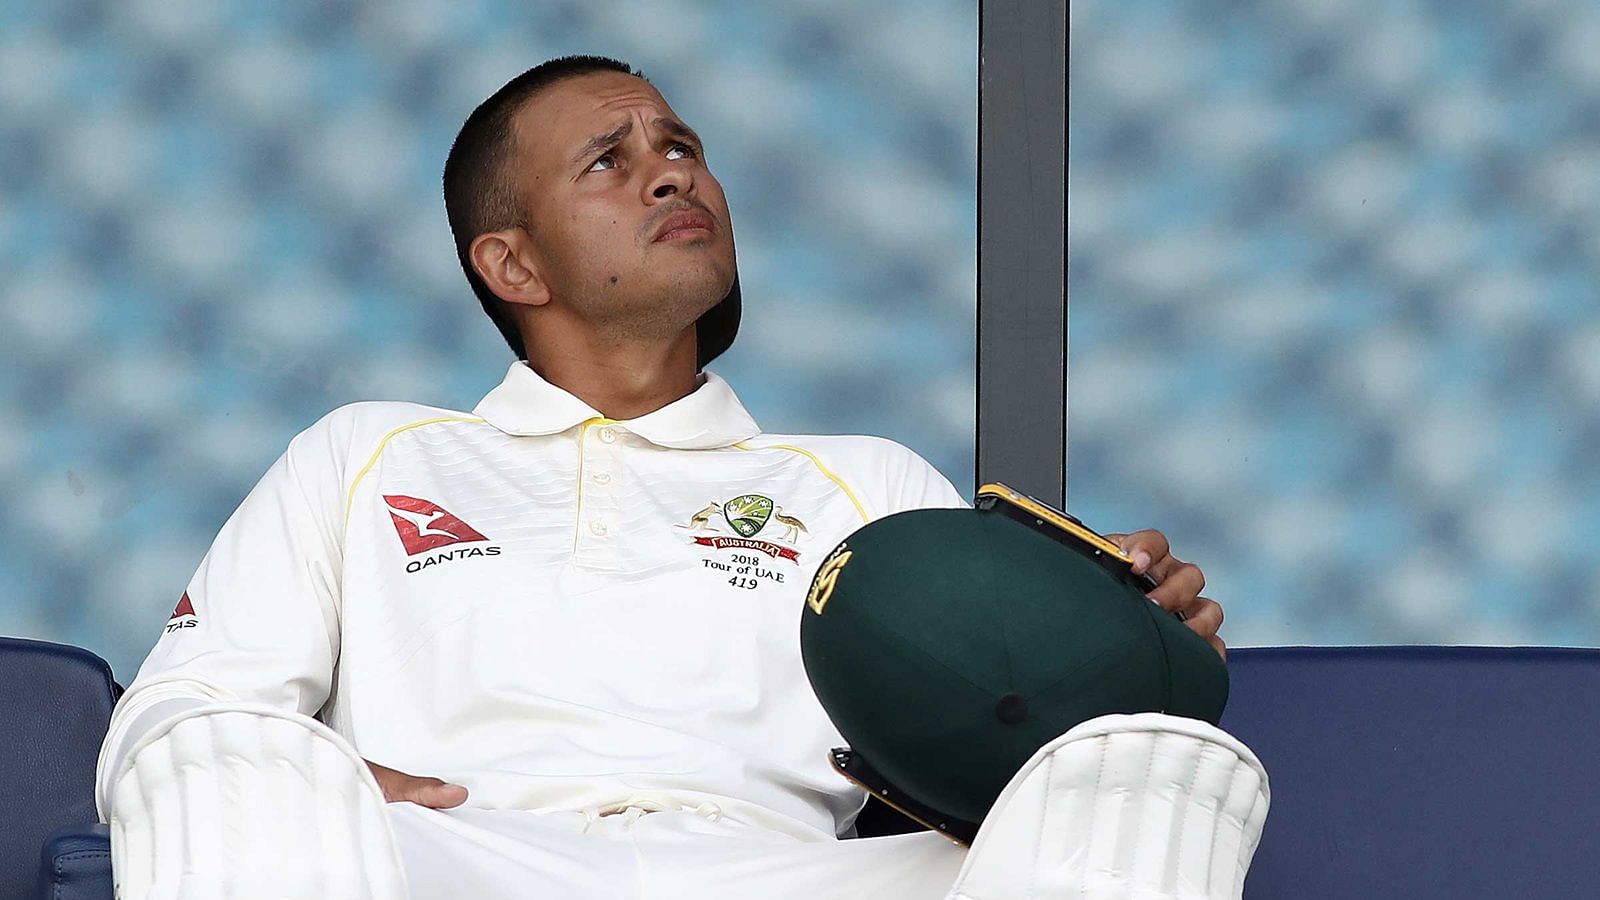 Usman Khawaja made the comparison when asked about the challenge of competing in thick smog.